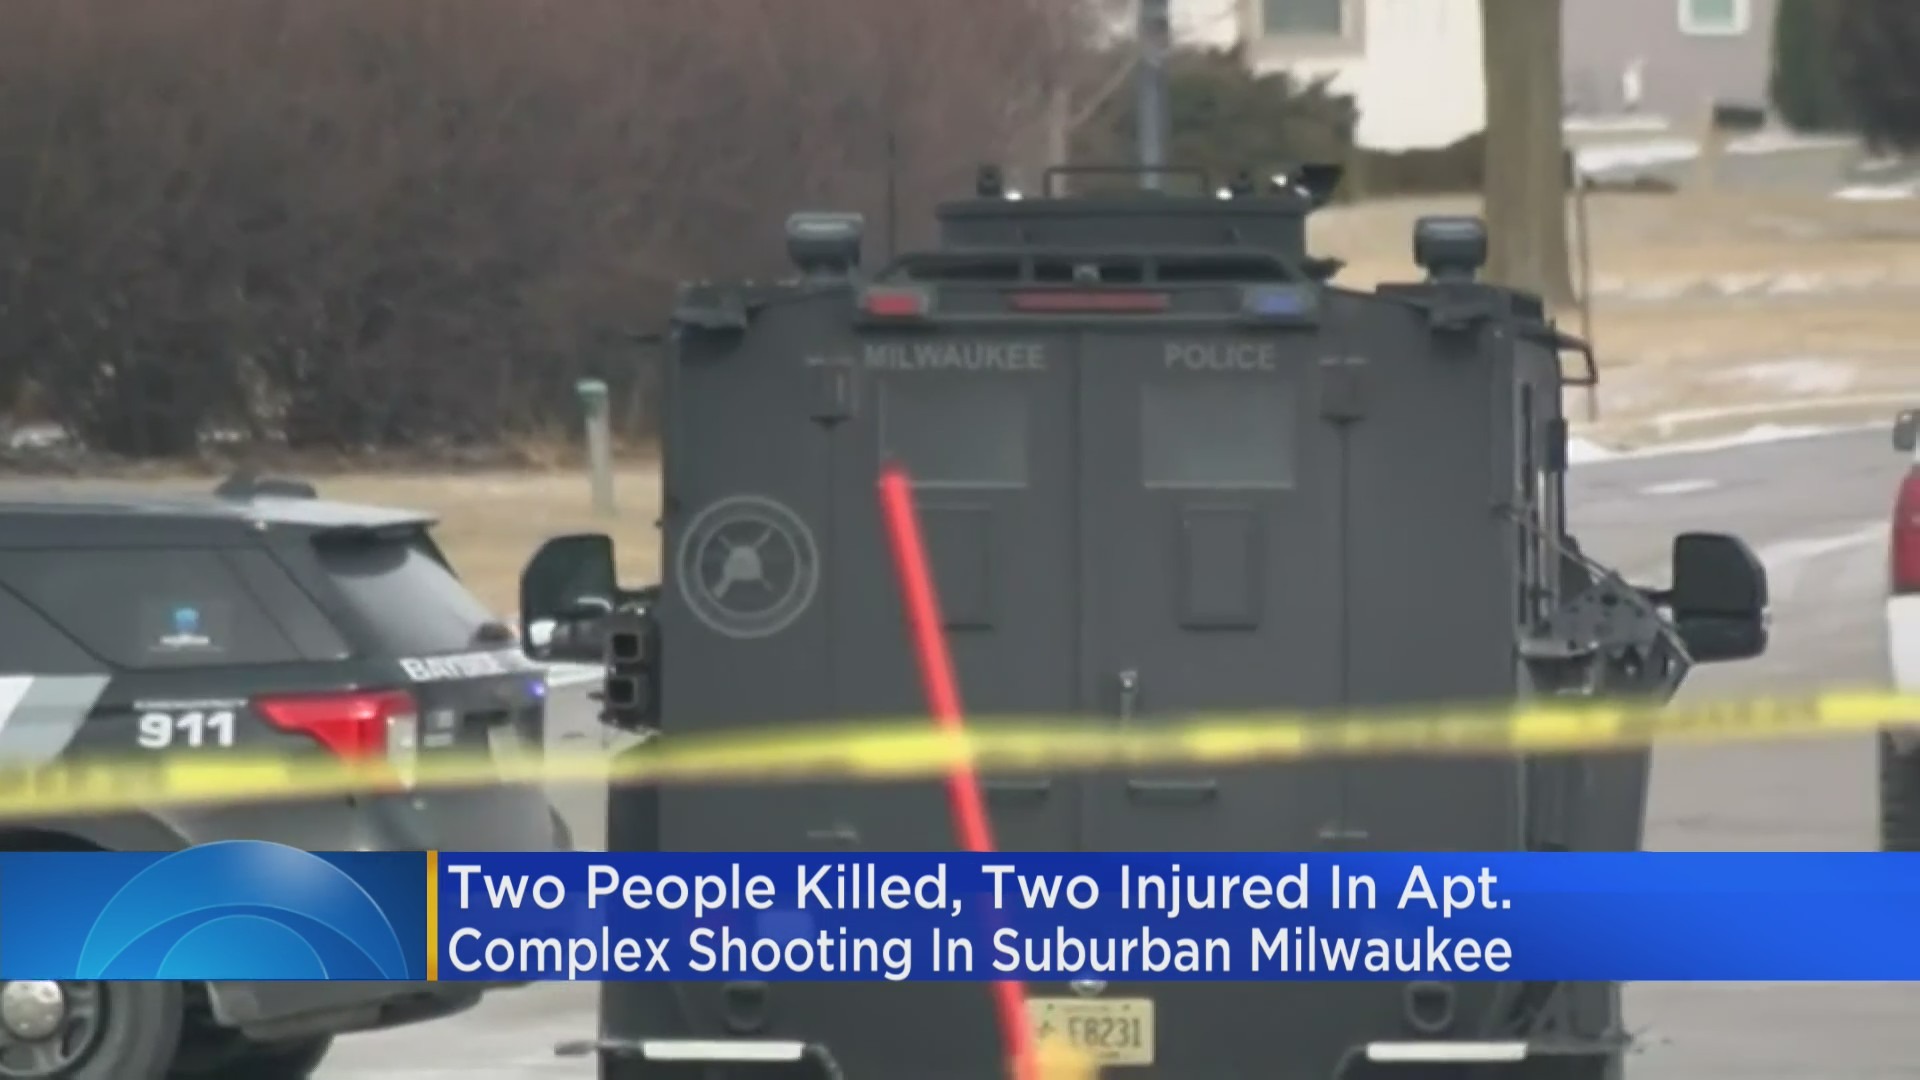 3 Dead, 2 Injured In Apartment Complex Shooting In Suburban Milwaukee – CBS Chicago